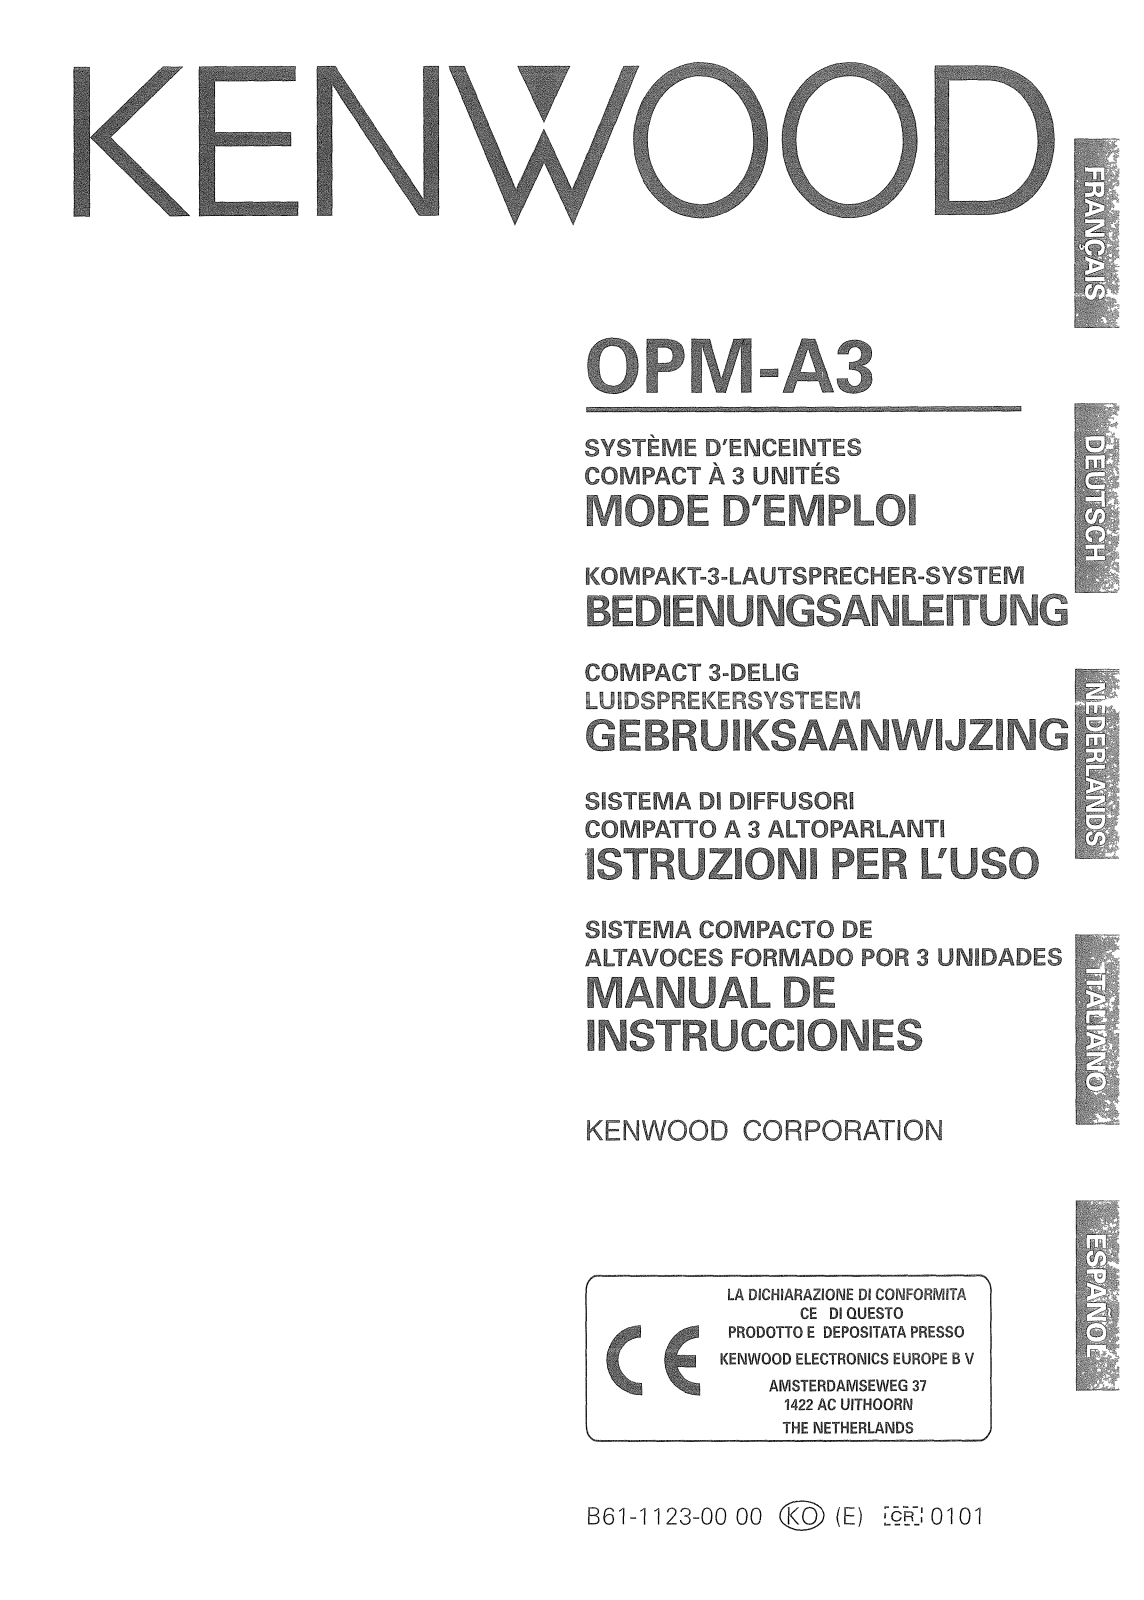 Kenwood OPM-A3 User's Manual